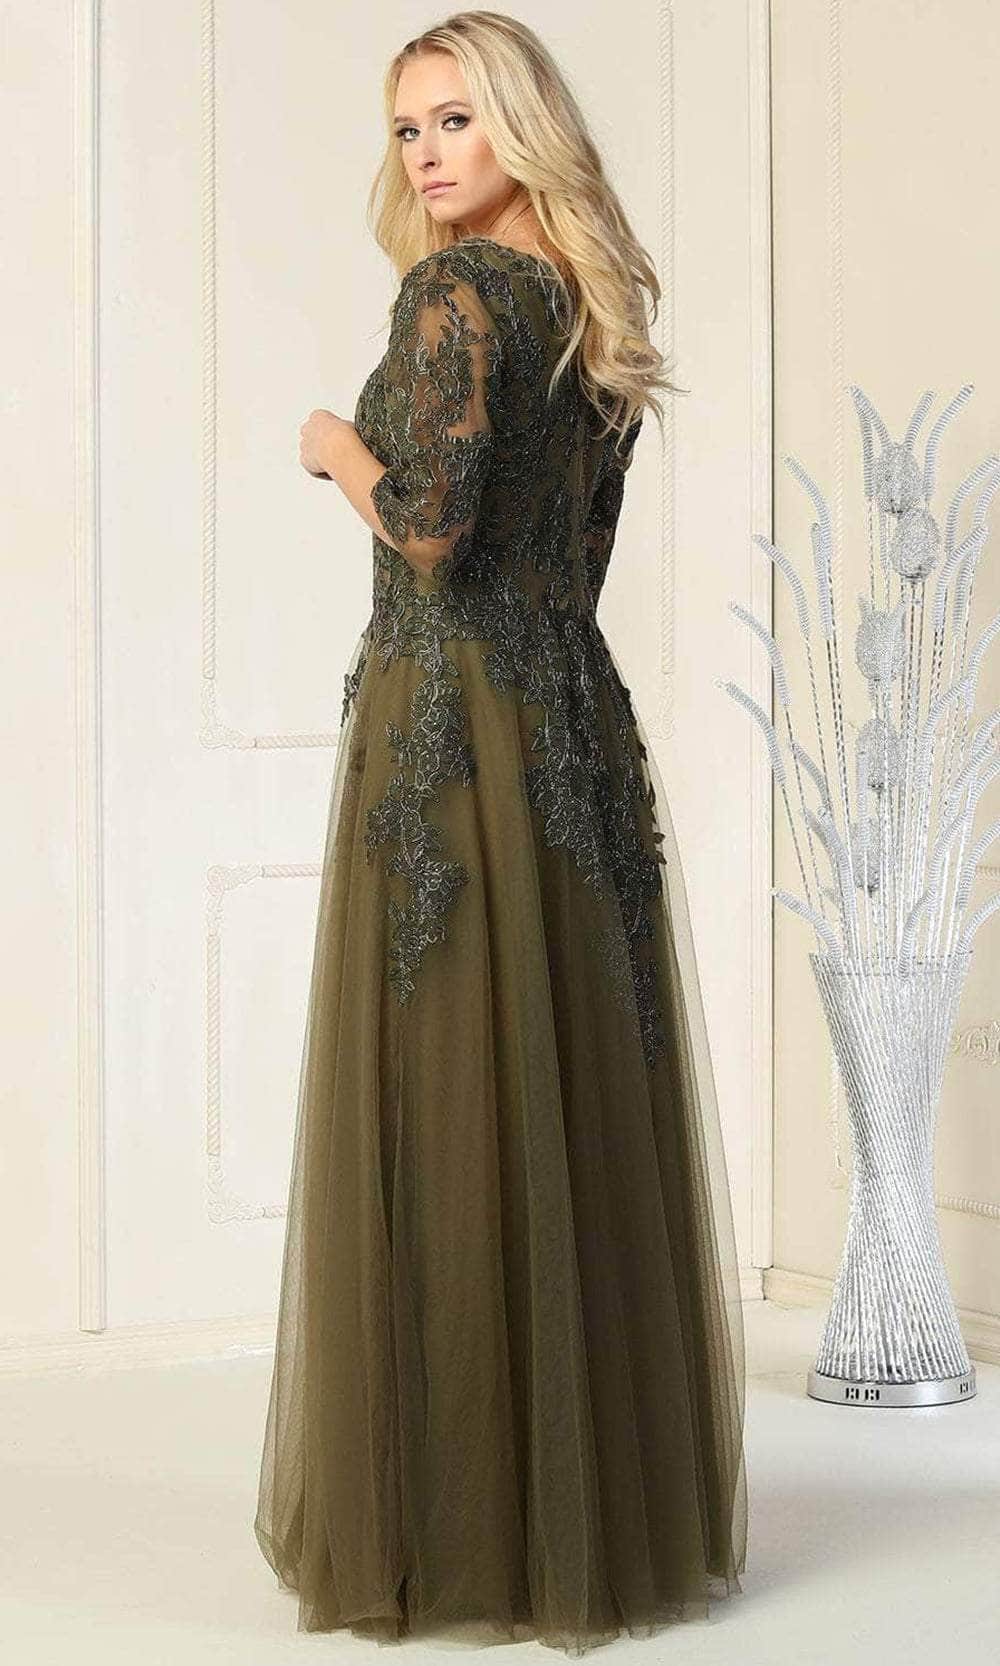 May Queen MQ1859 - Elbow Sleeve Lace Formal Gown Evening Dresses